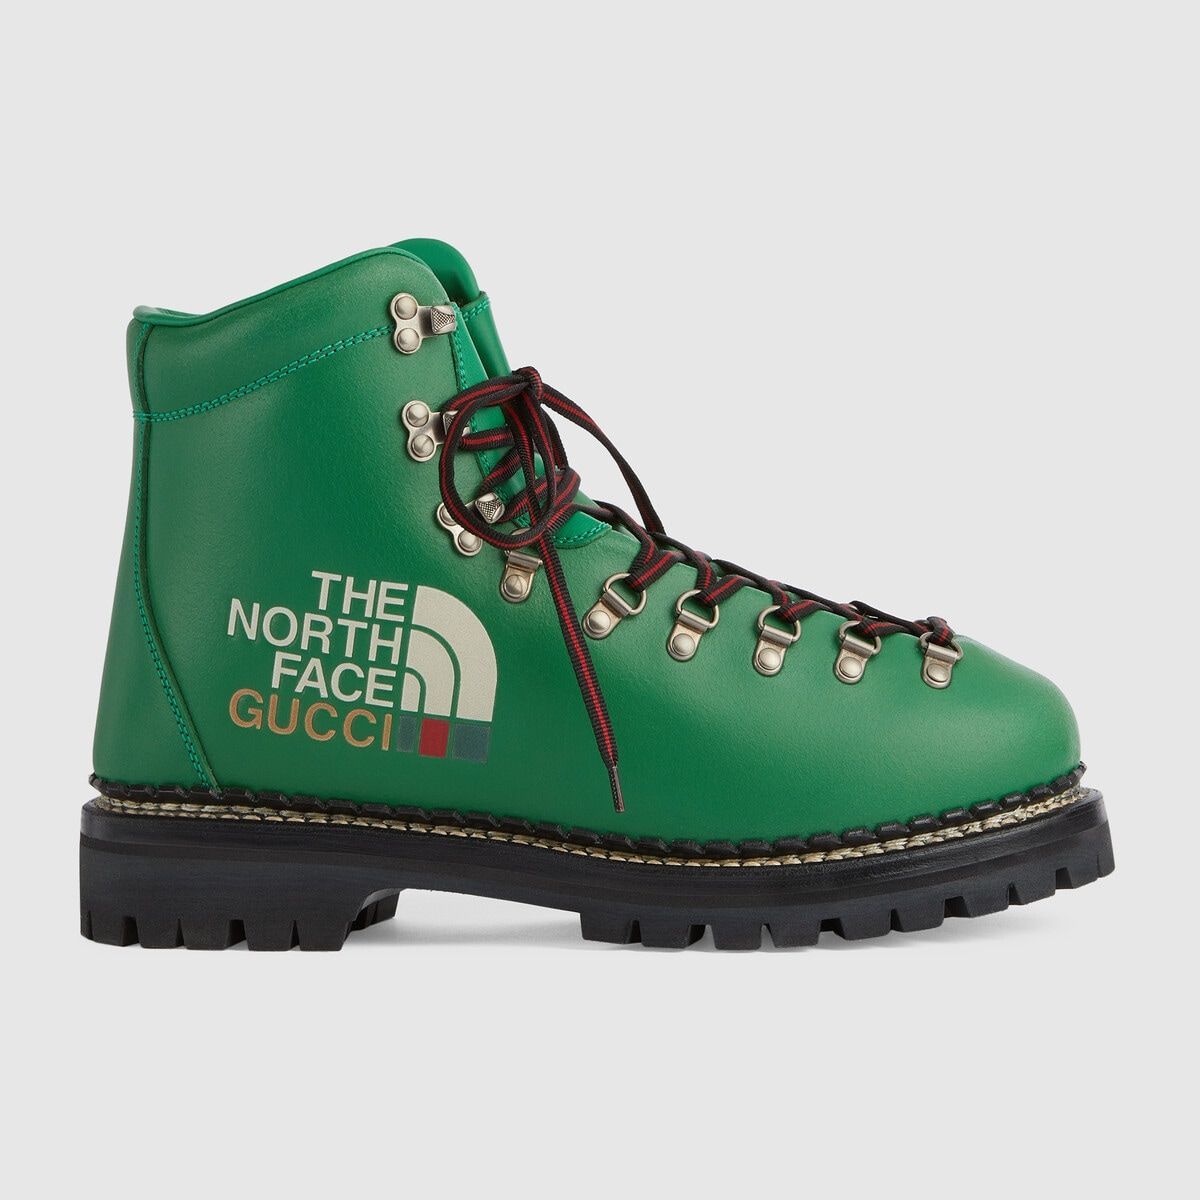 Men's The North Face x Gucci boot